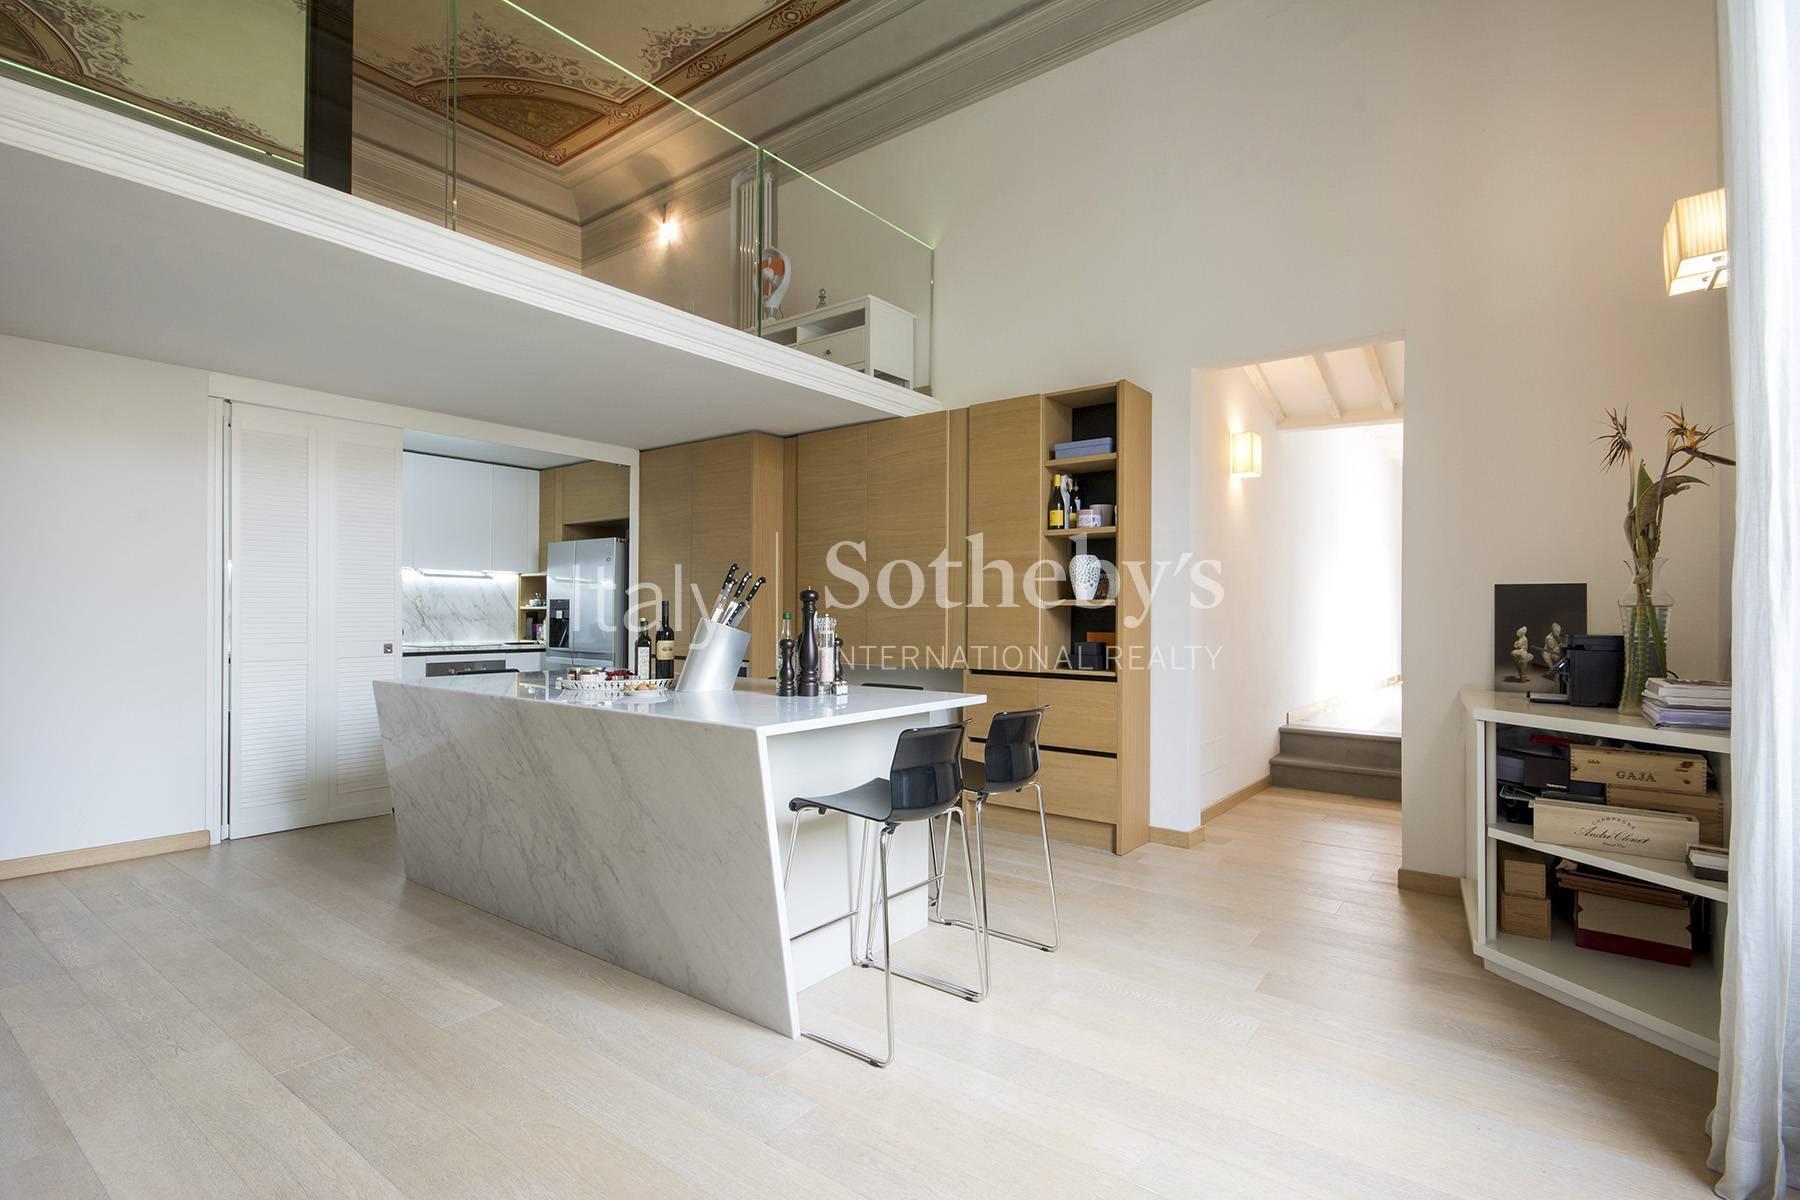 Lovely modern apartment in the Oltrarno district - 6